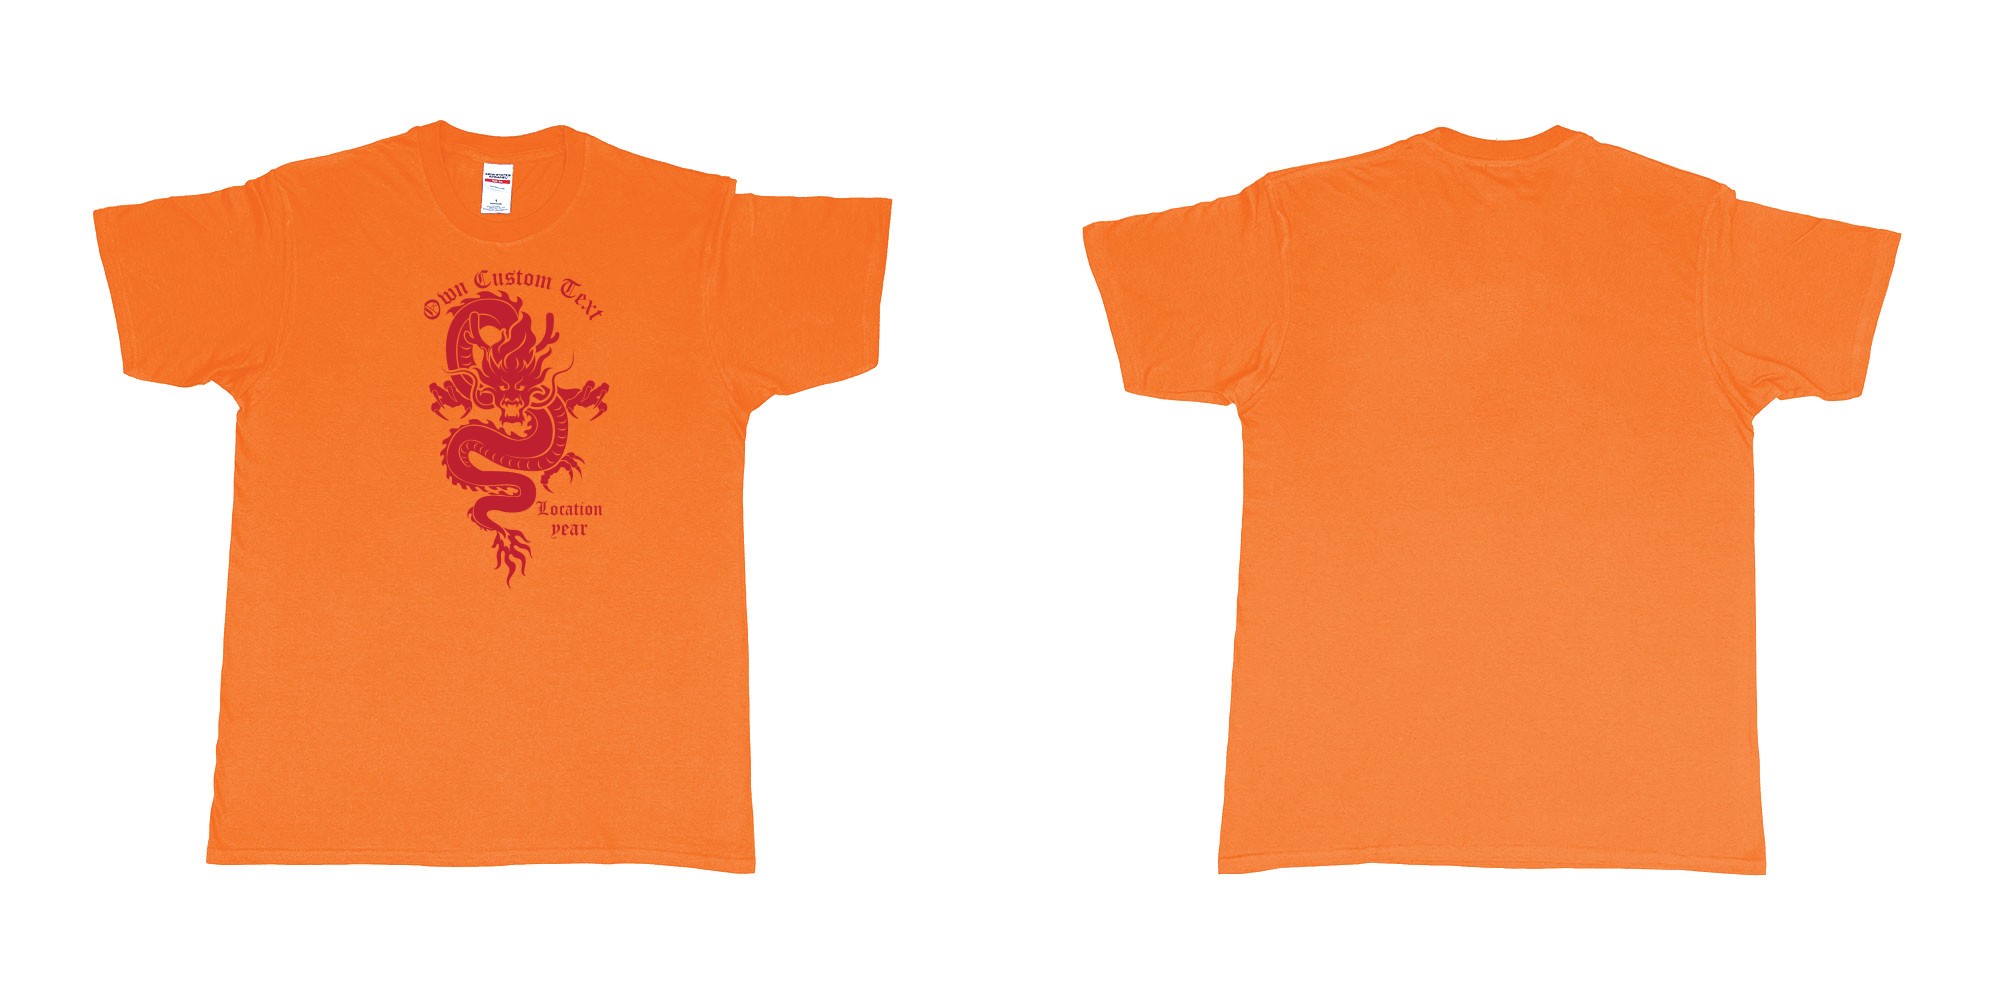 Custom tshirt design custom dragon print text in fabric color orange choice your own text made in Bali by The Pirate Way